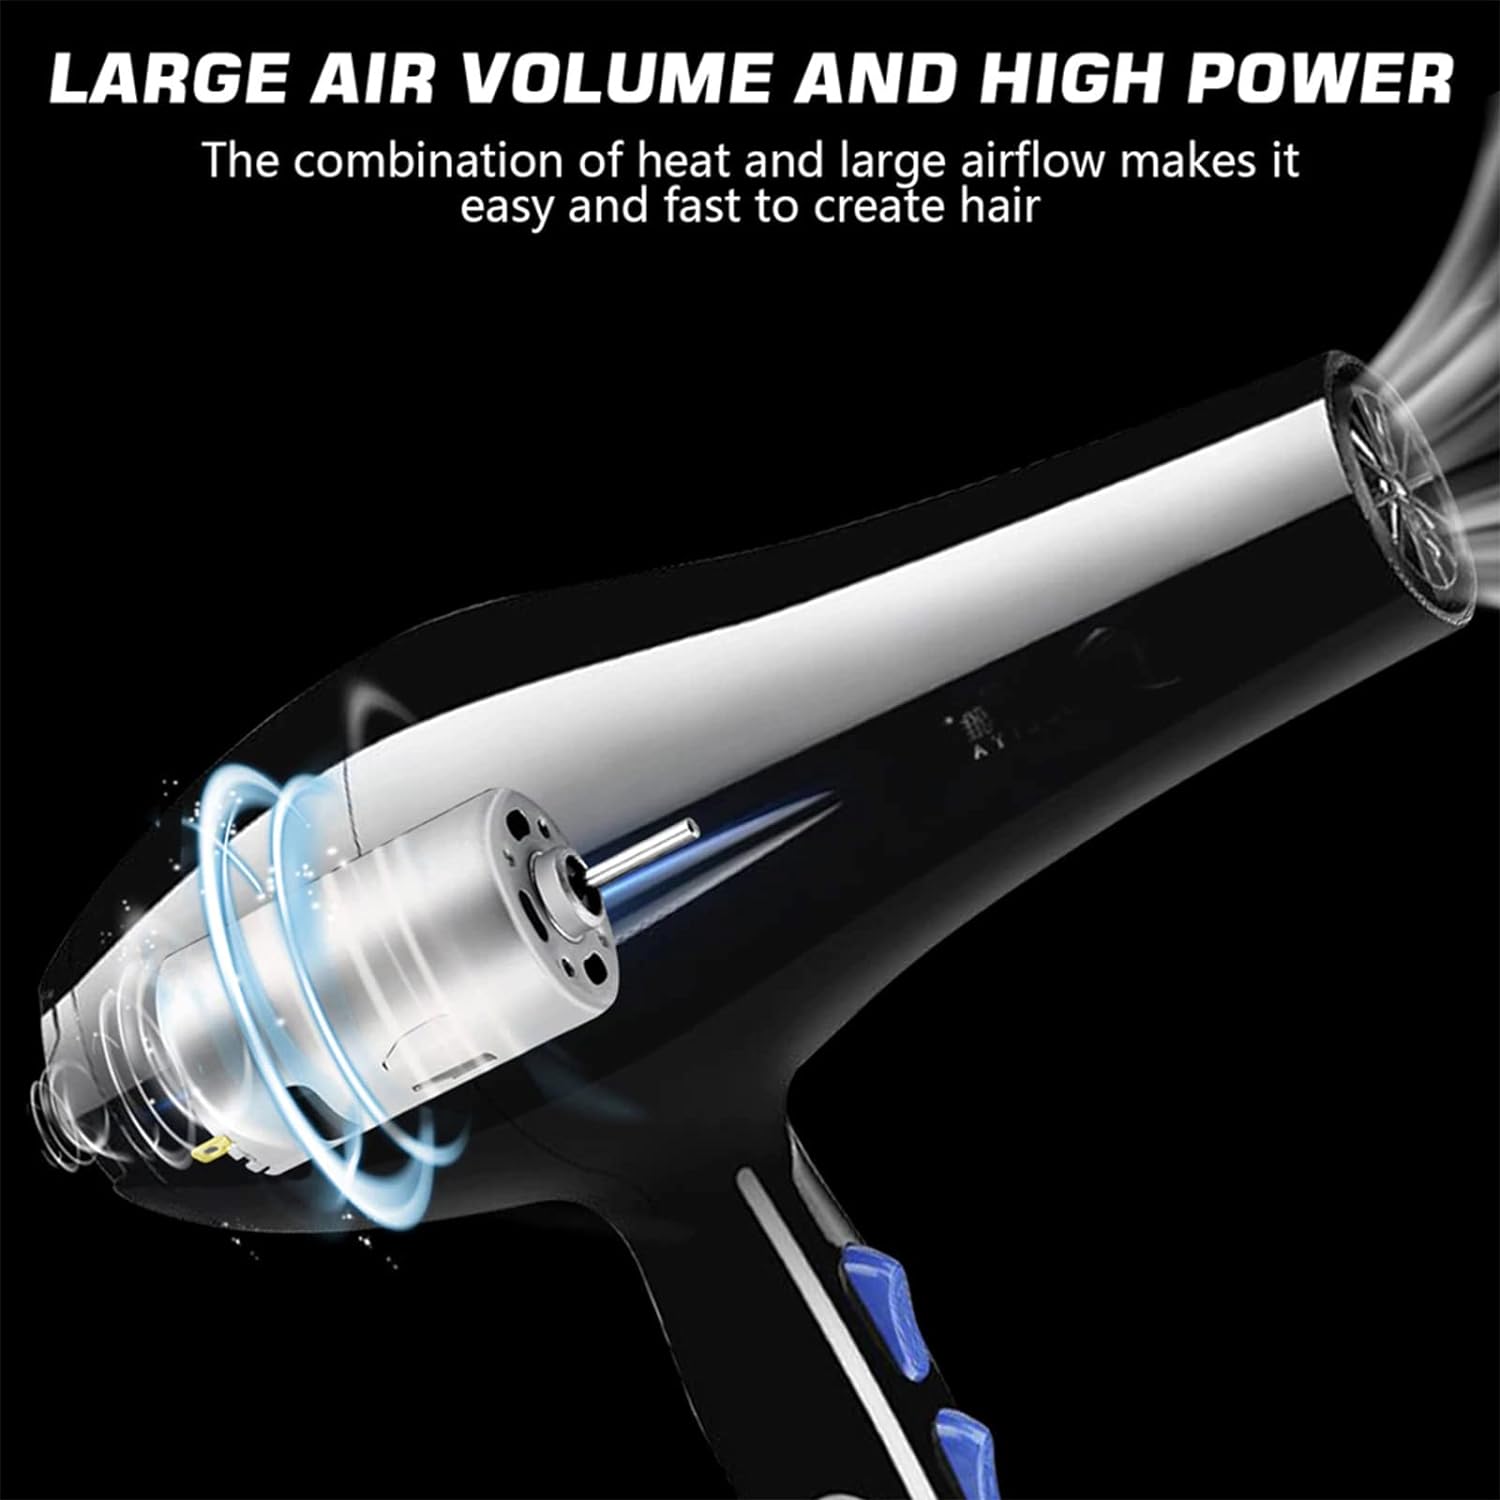 2200w Hair Dryer, Upgraded Version Salon Fast Drying Ion Professional Hairdryer With Diffuser, Fast Drying Blow Dryer Low Noise With 2 Speed and 3 Heat Setting For Curly and Straight Hair